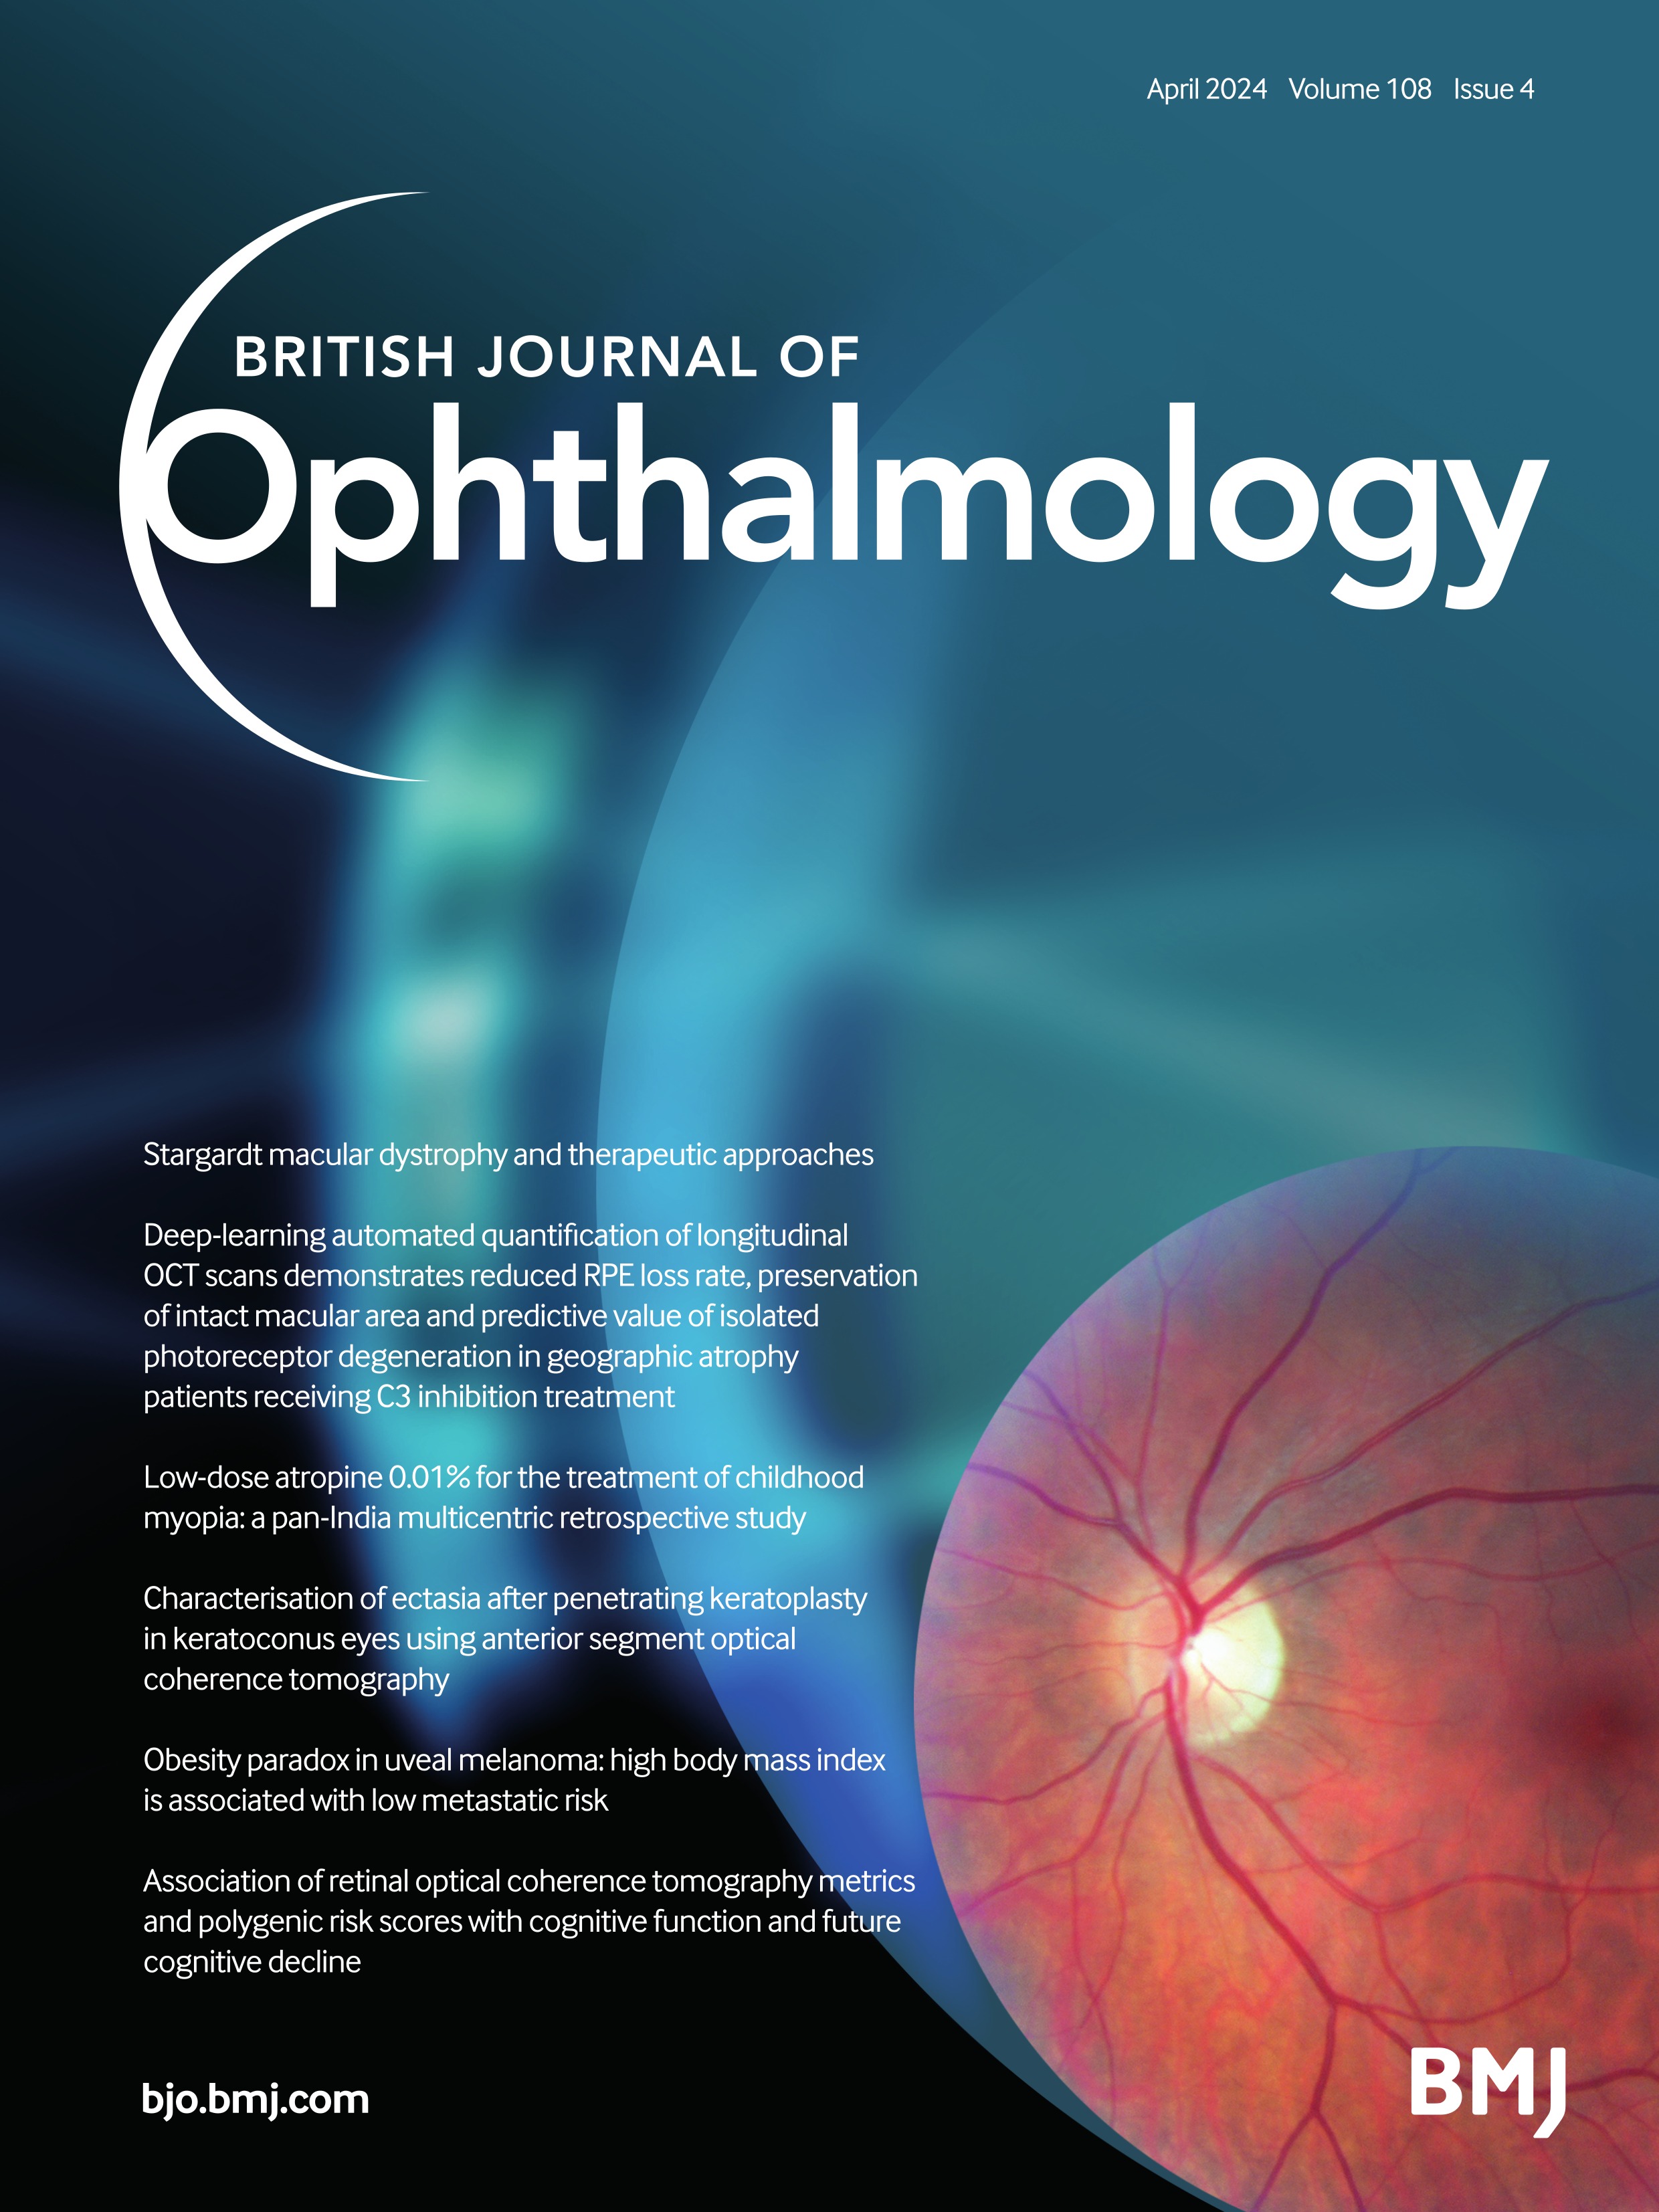 Lacrimal gland activity in lacrimal drainage obstruction: exploring the potential cross-talk between the tear secretion and outflow